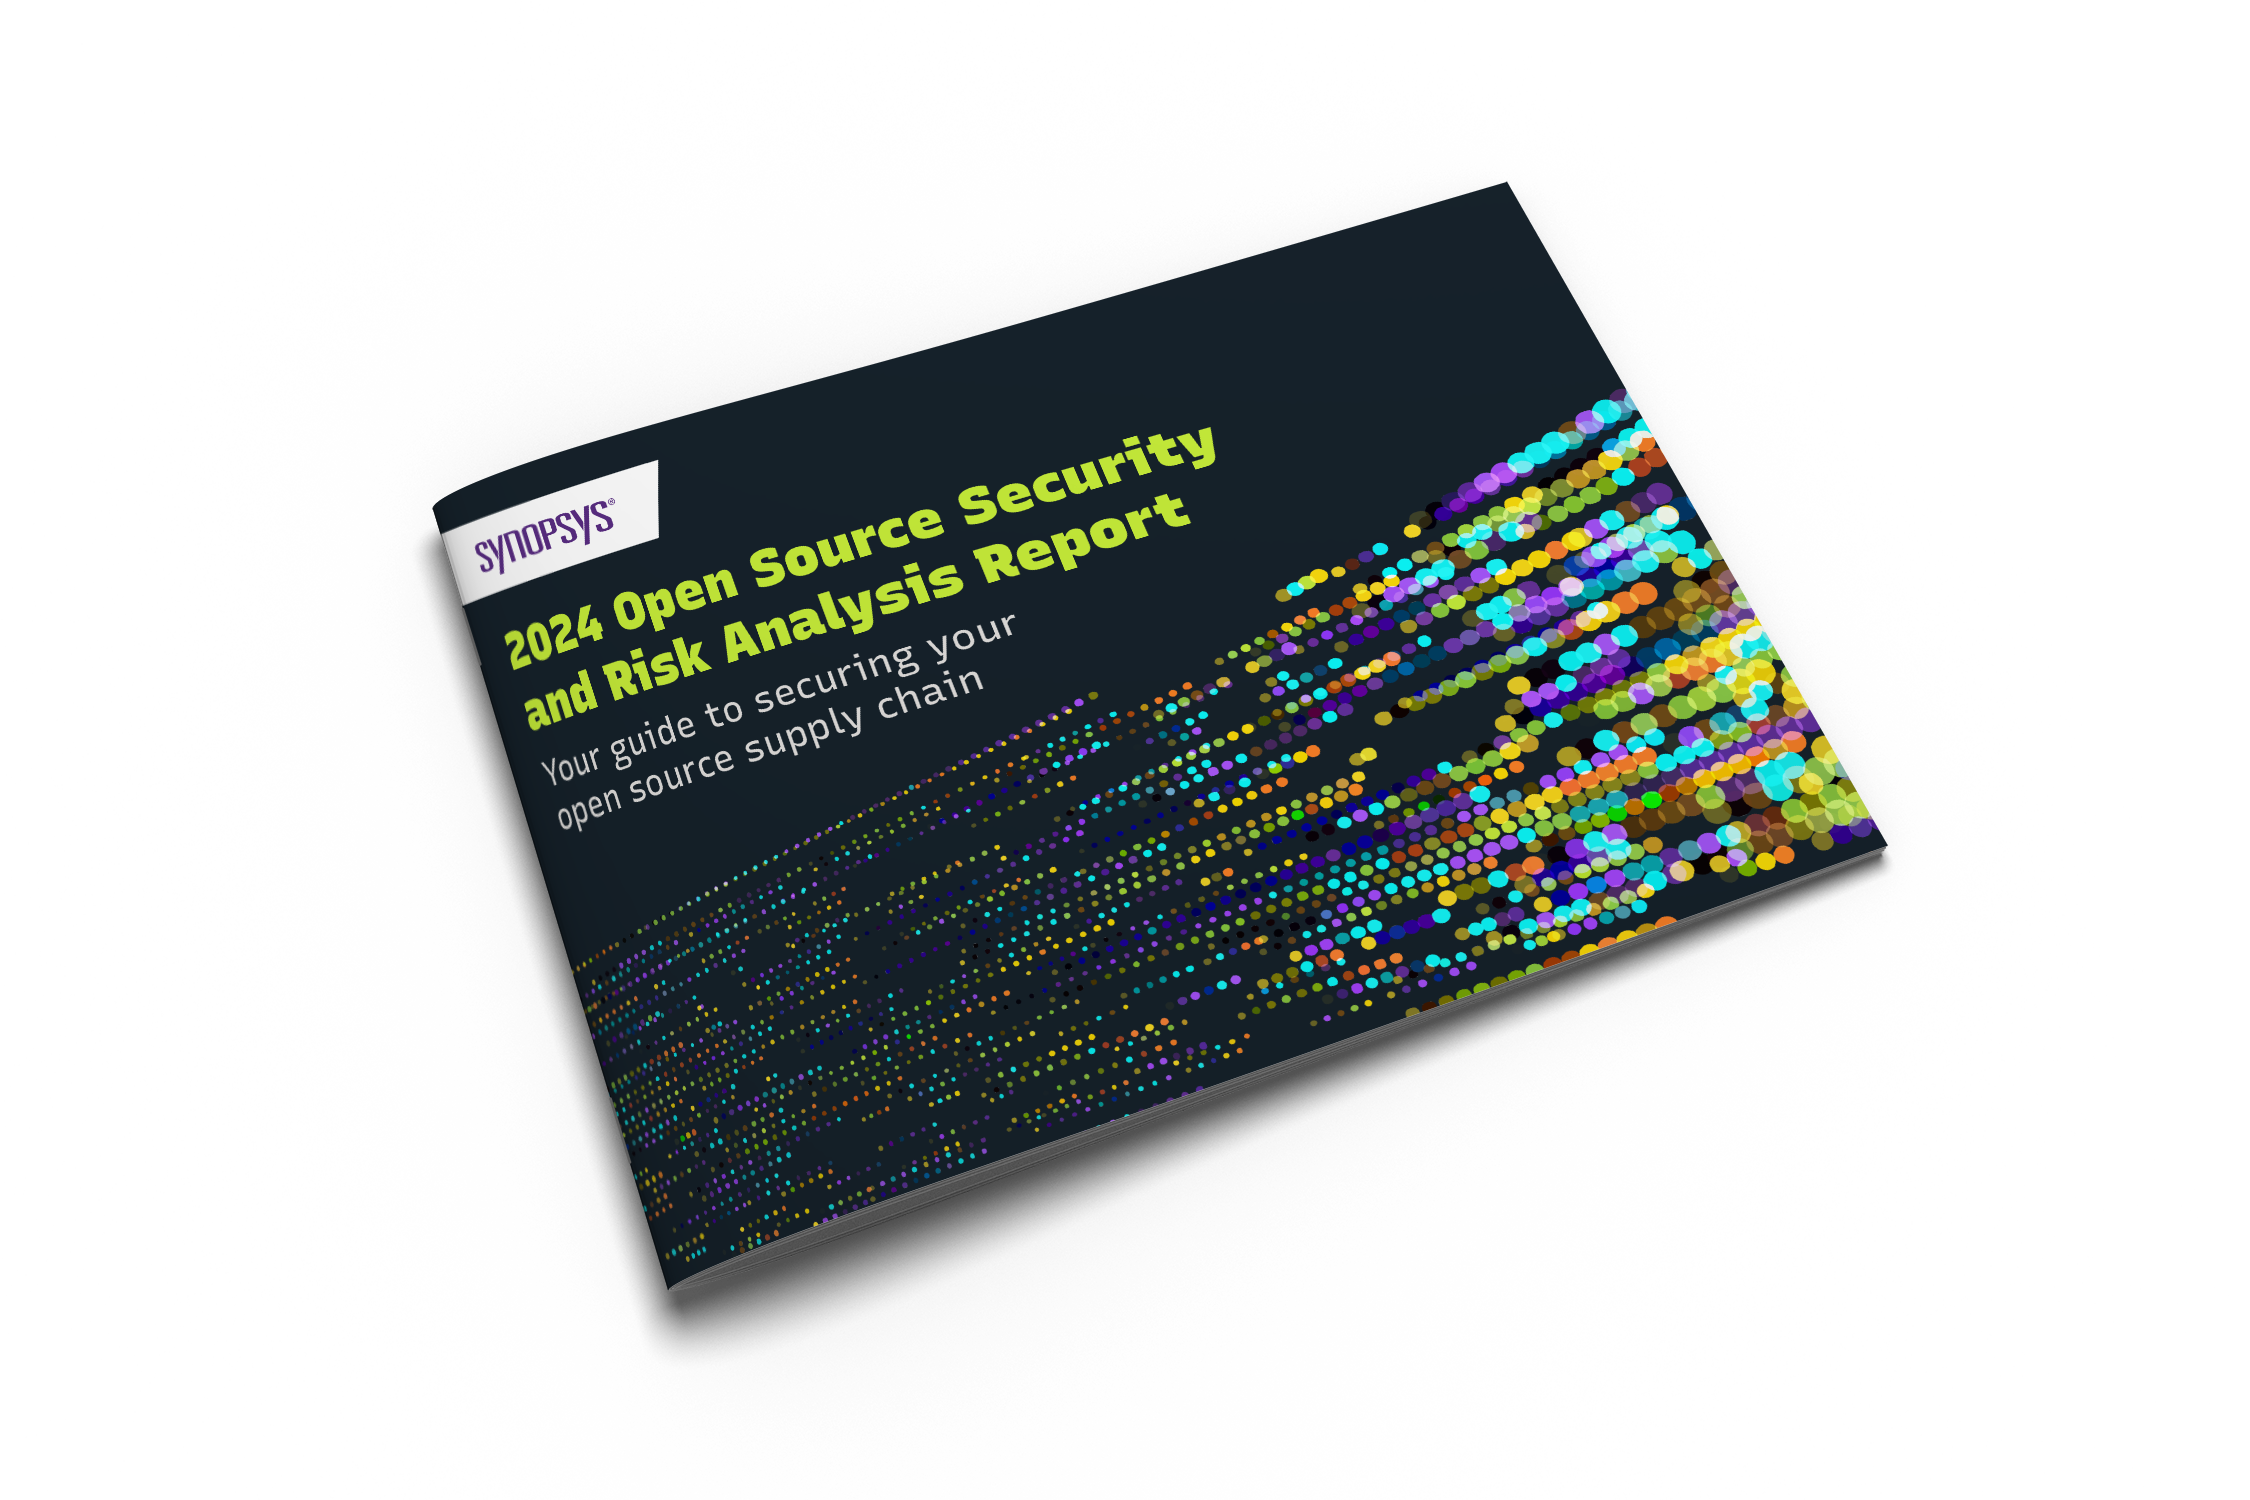 2024 Open Source Security and Risk Analysis Report book cover